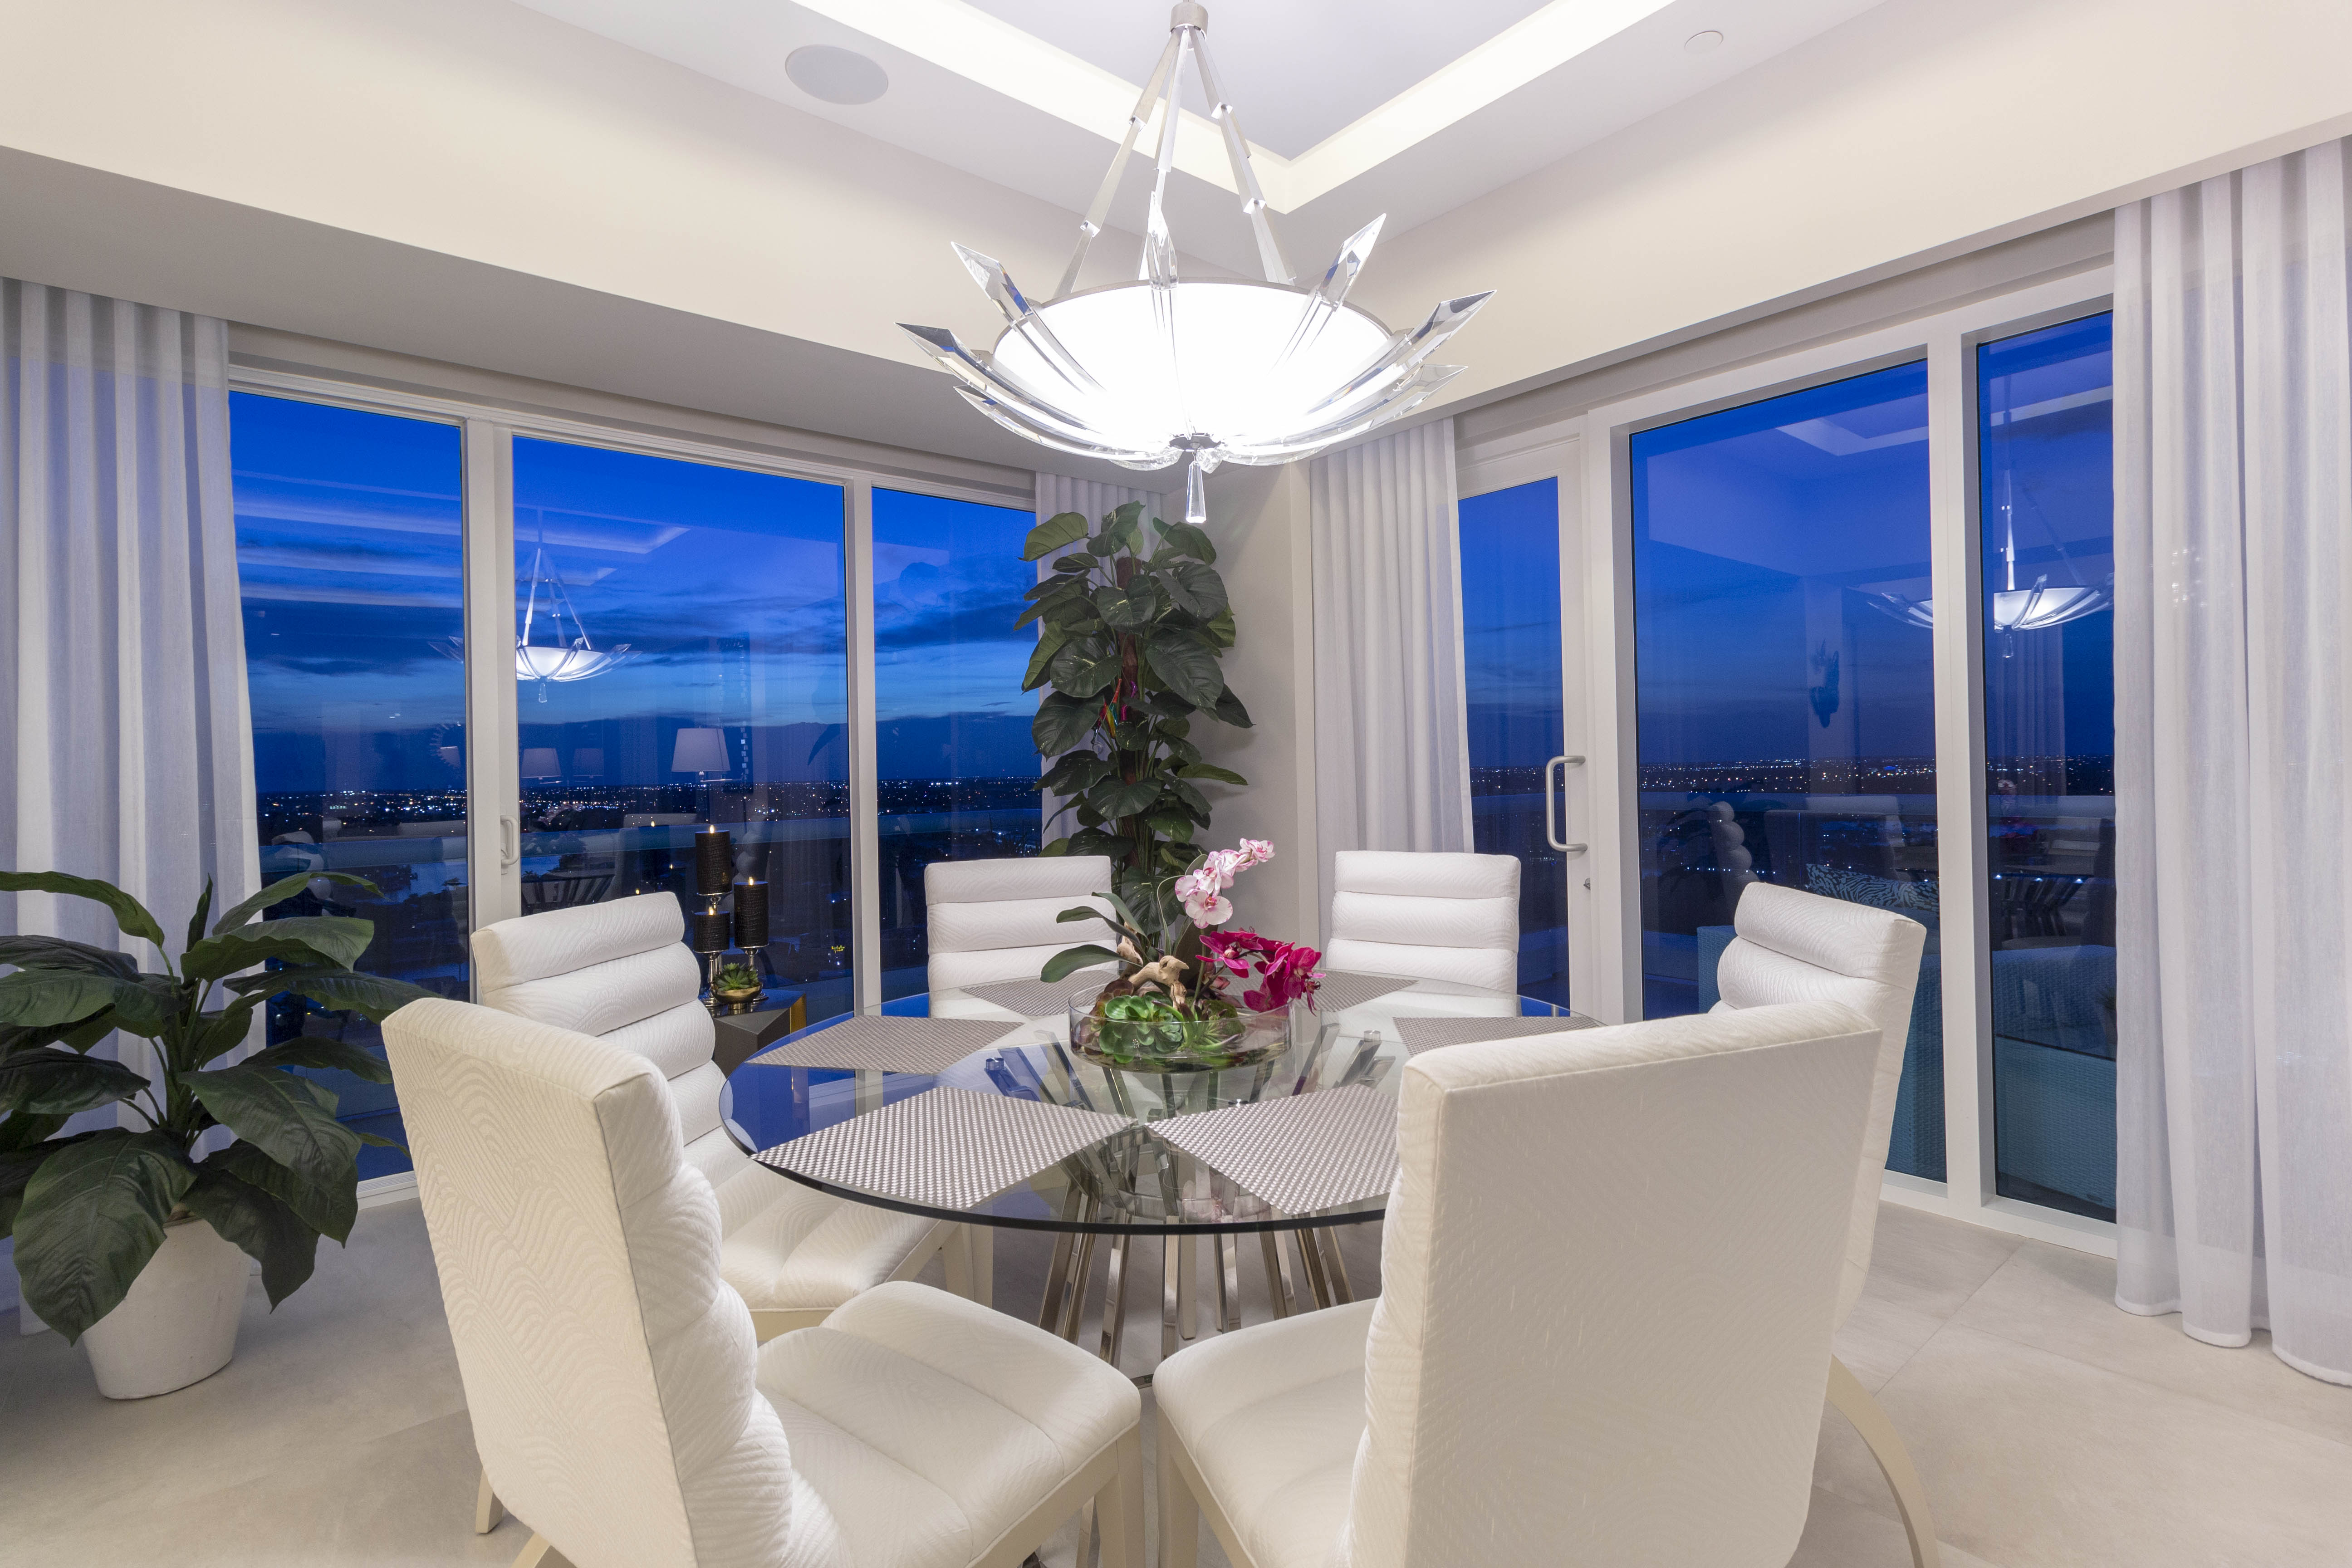 Oceanside24 provides city and ocean views of Fort Lauderdale